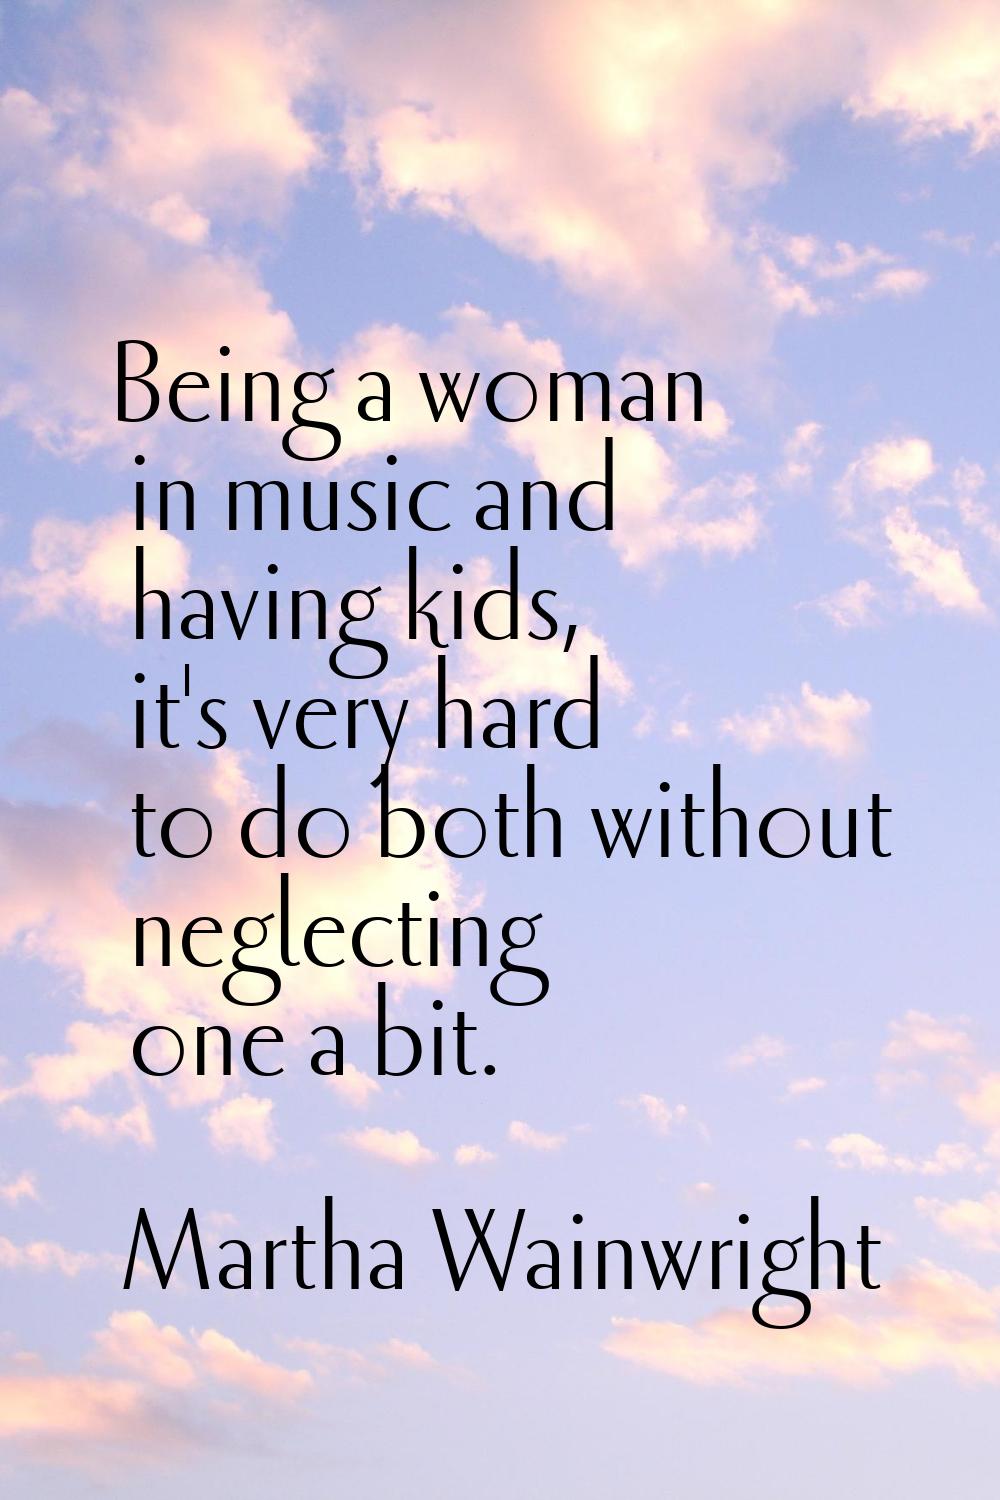 Being a woman in music and having kids, it's very hard to do both without neglecting one a bit.